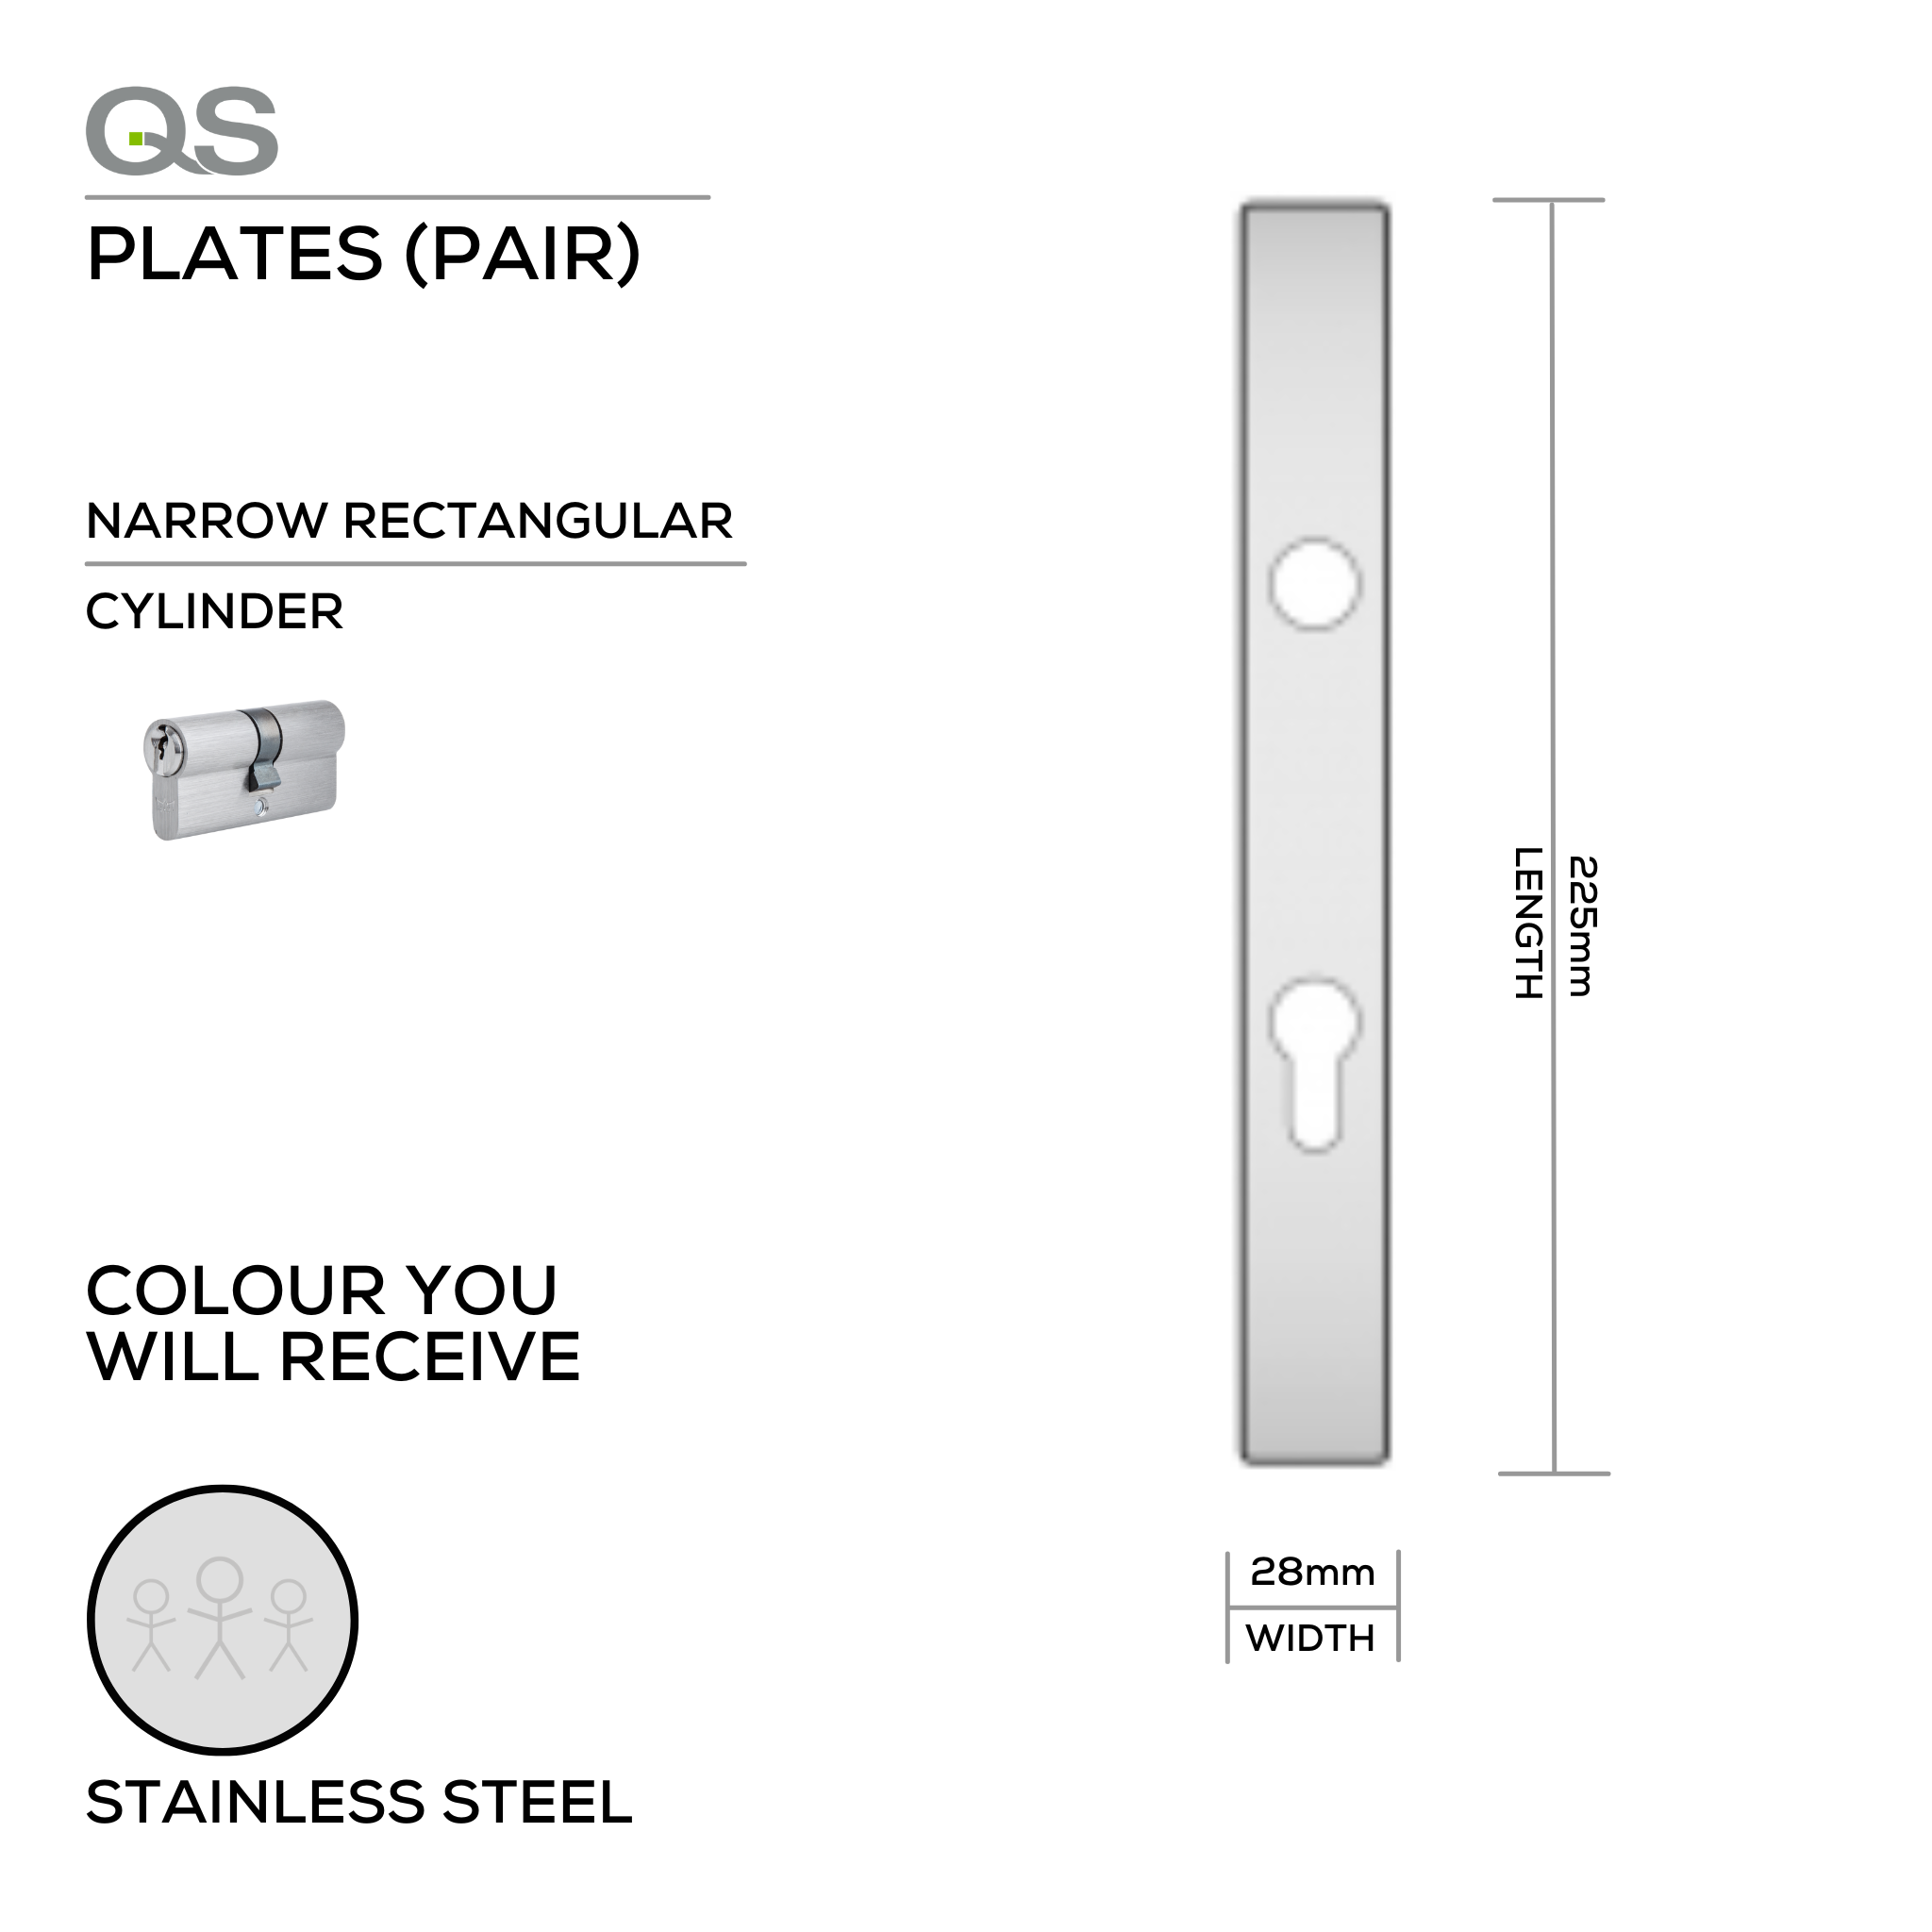 QS4428 CYL, Plate, Narrow Rectangular, 225mm (l) x 28mm (w), Supplied with QS Handle (Price if purchasing a Qs handle at same time), Stainless Steel, QS